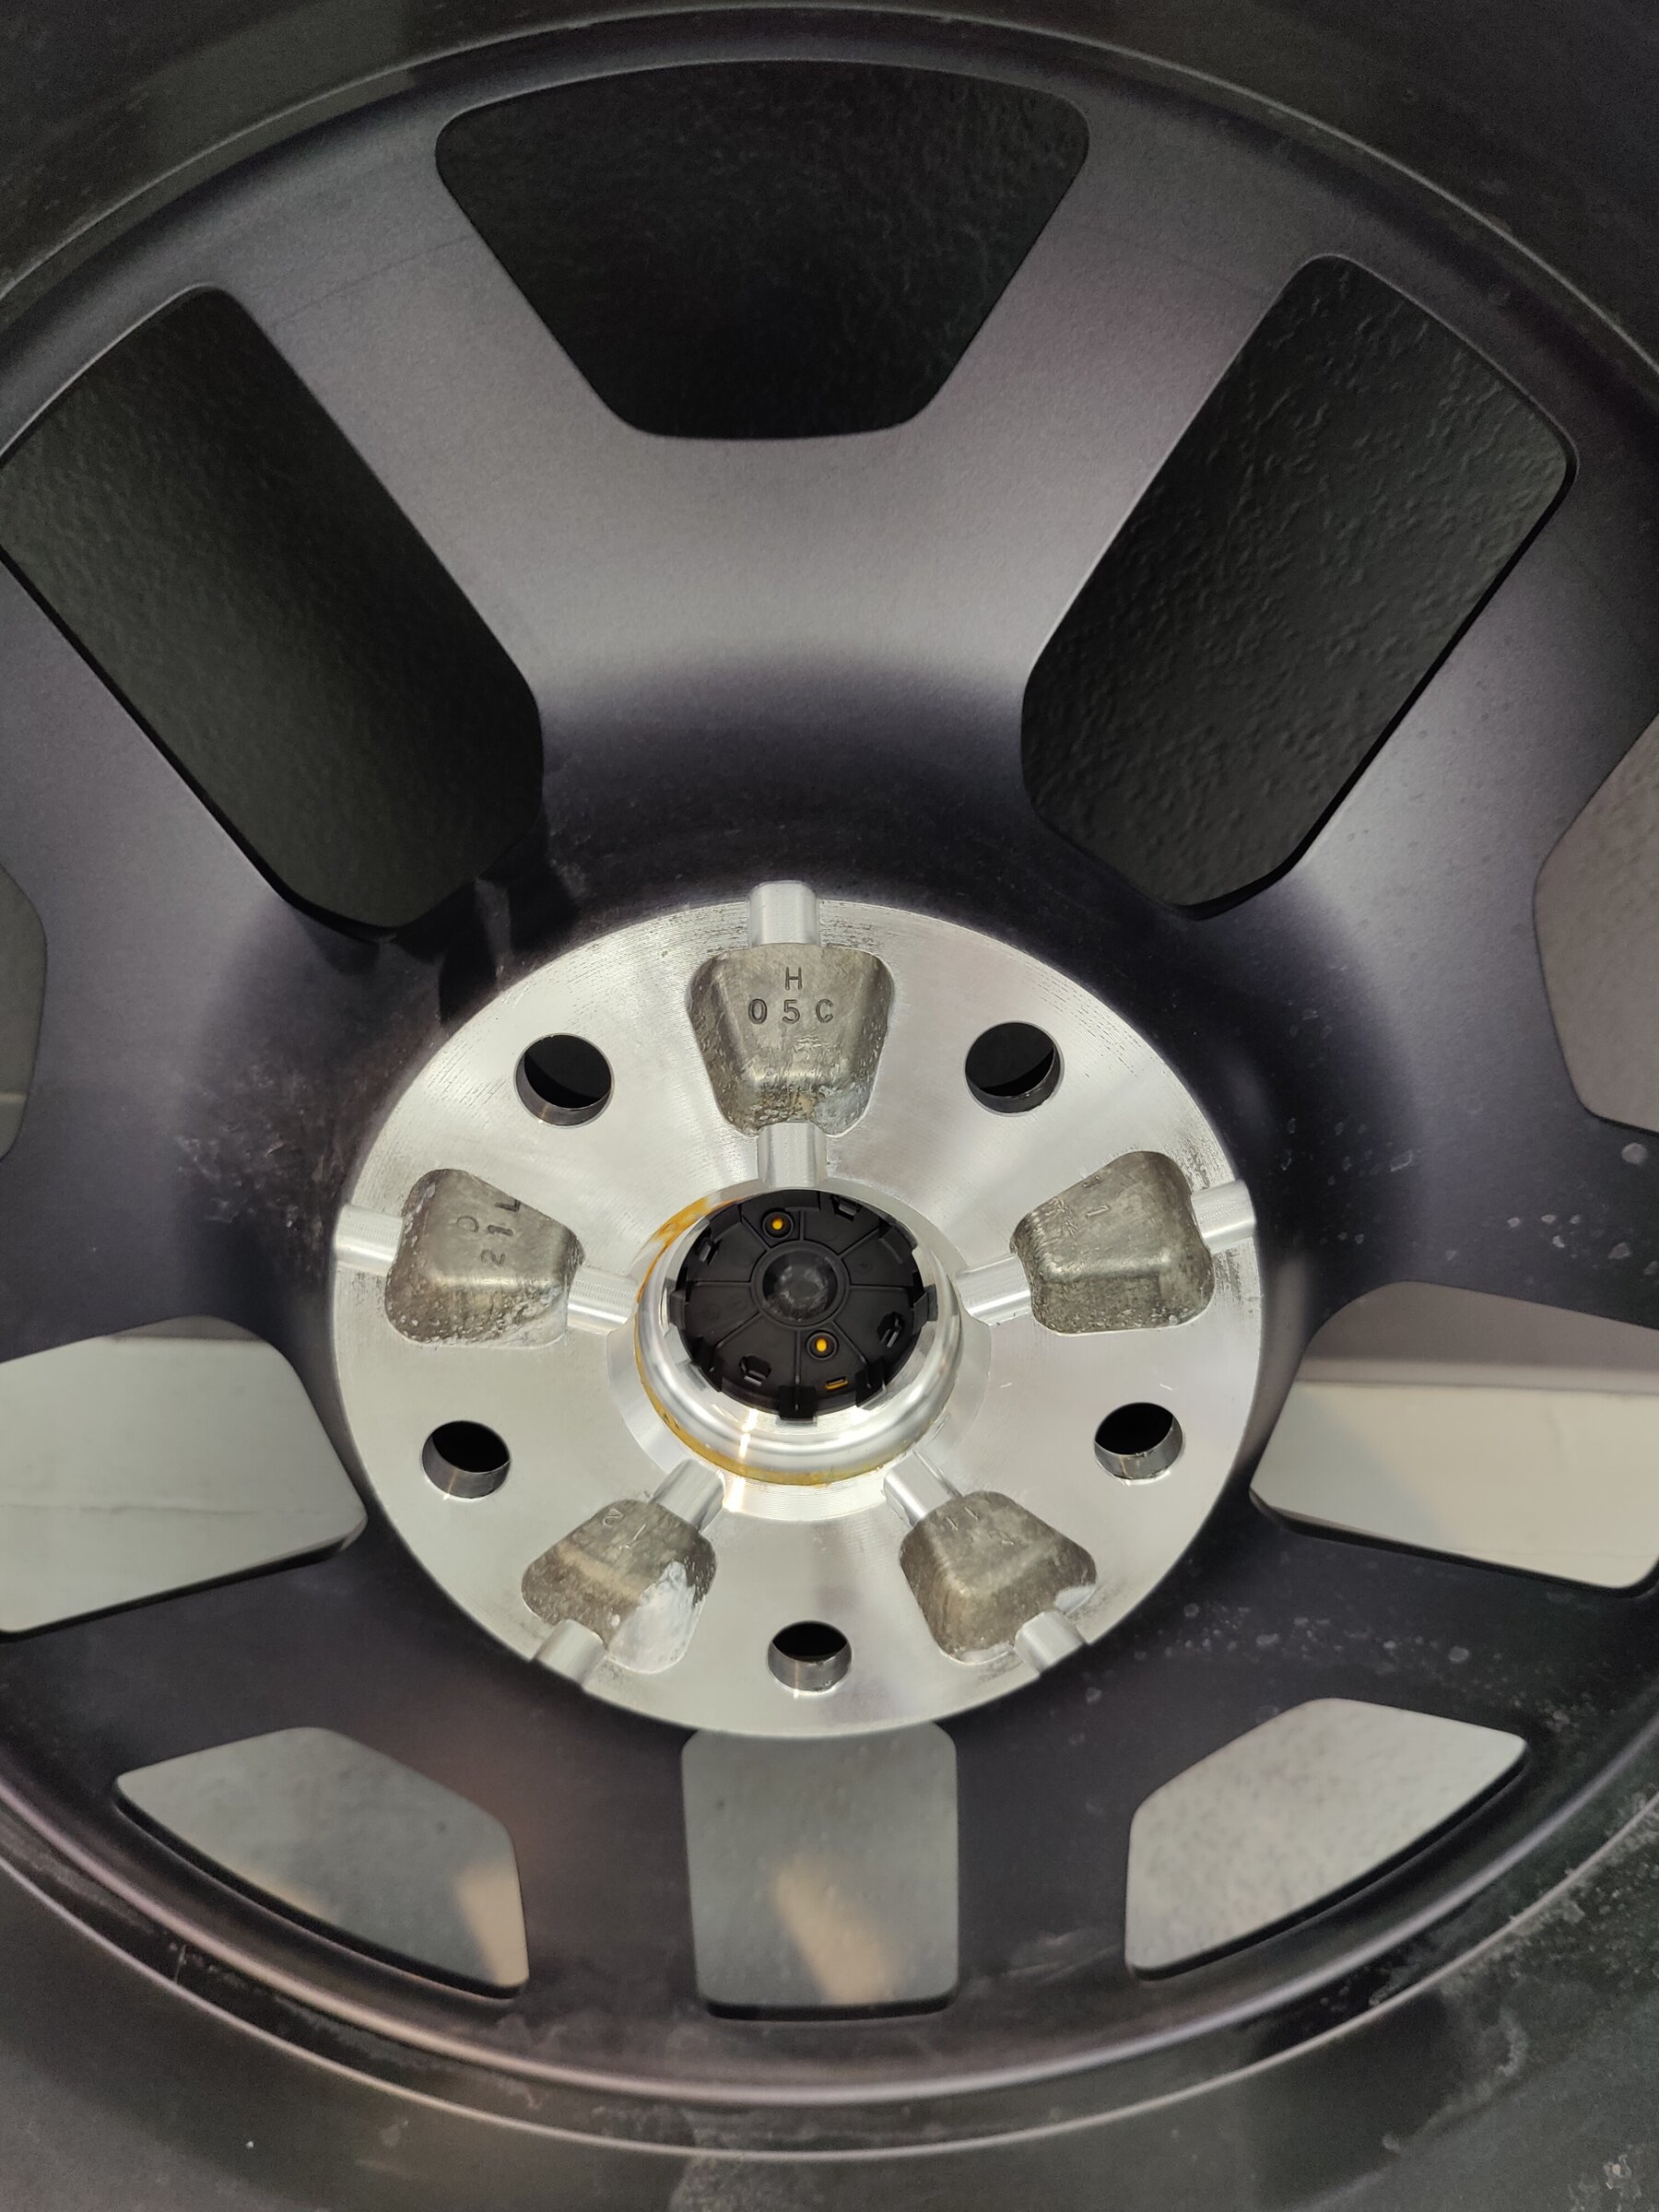 Rivian R1T R1S R1T 20" AT Wheel Weight, Specs, Offset, Bolt Pattern, Construction IMG_20220330_160947